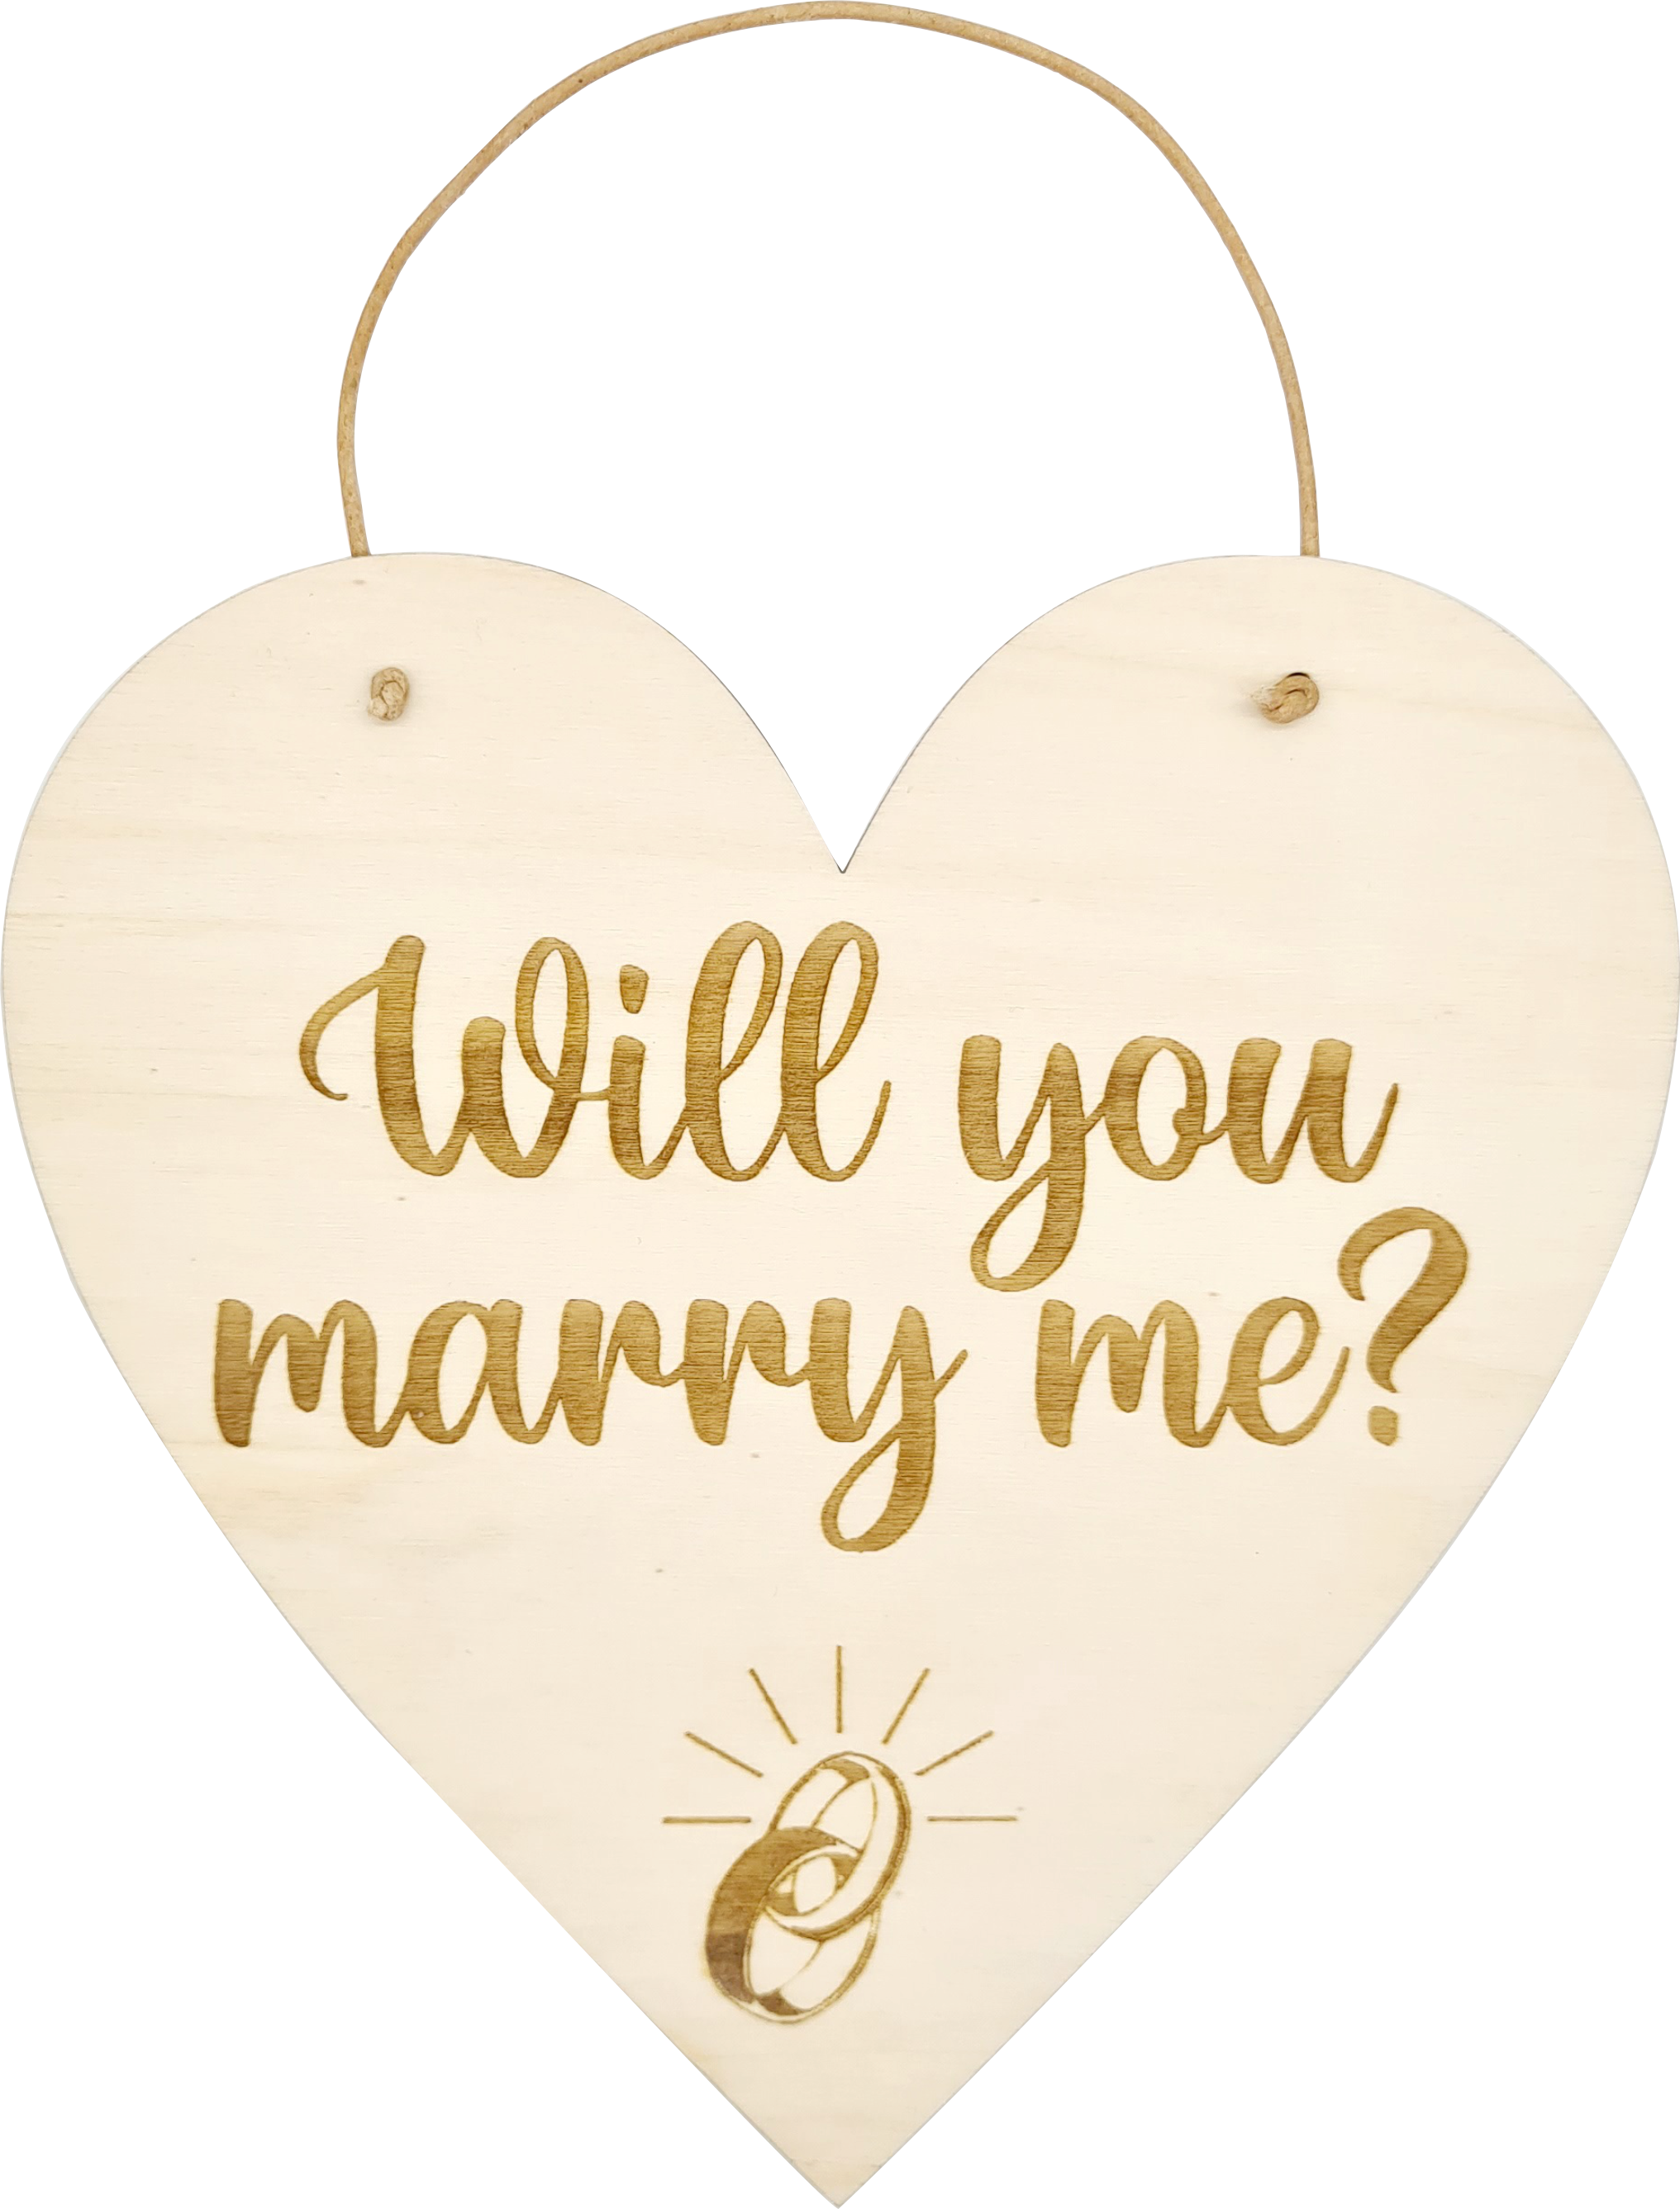 Herz mit Beschriftung - Will you marry me?